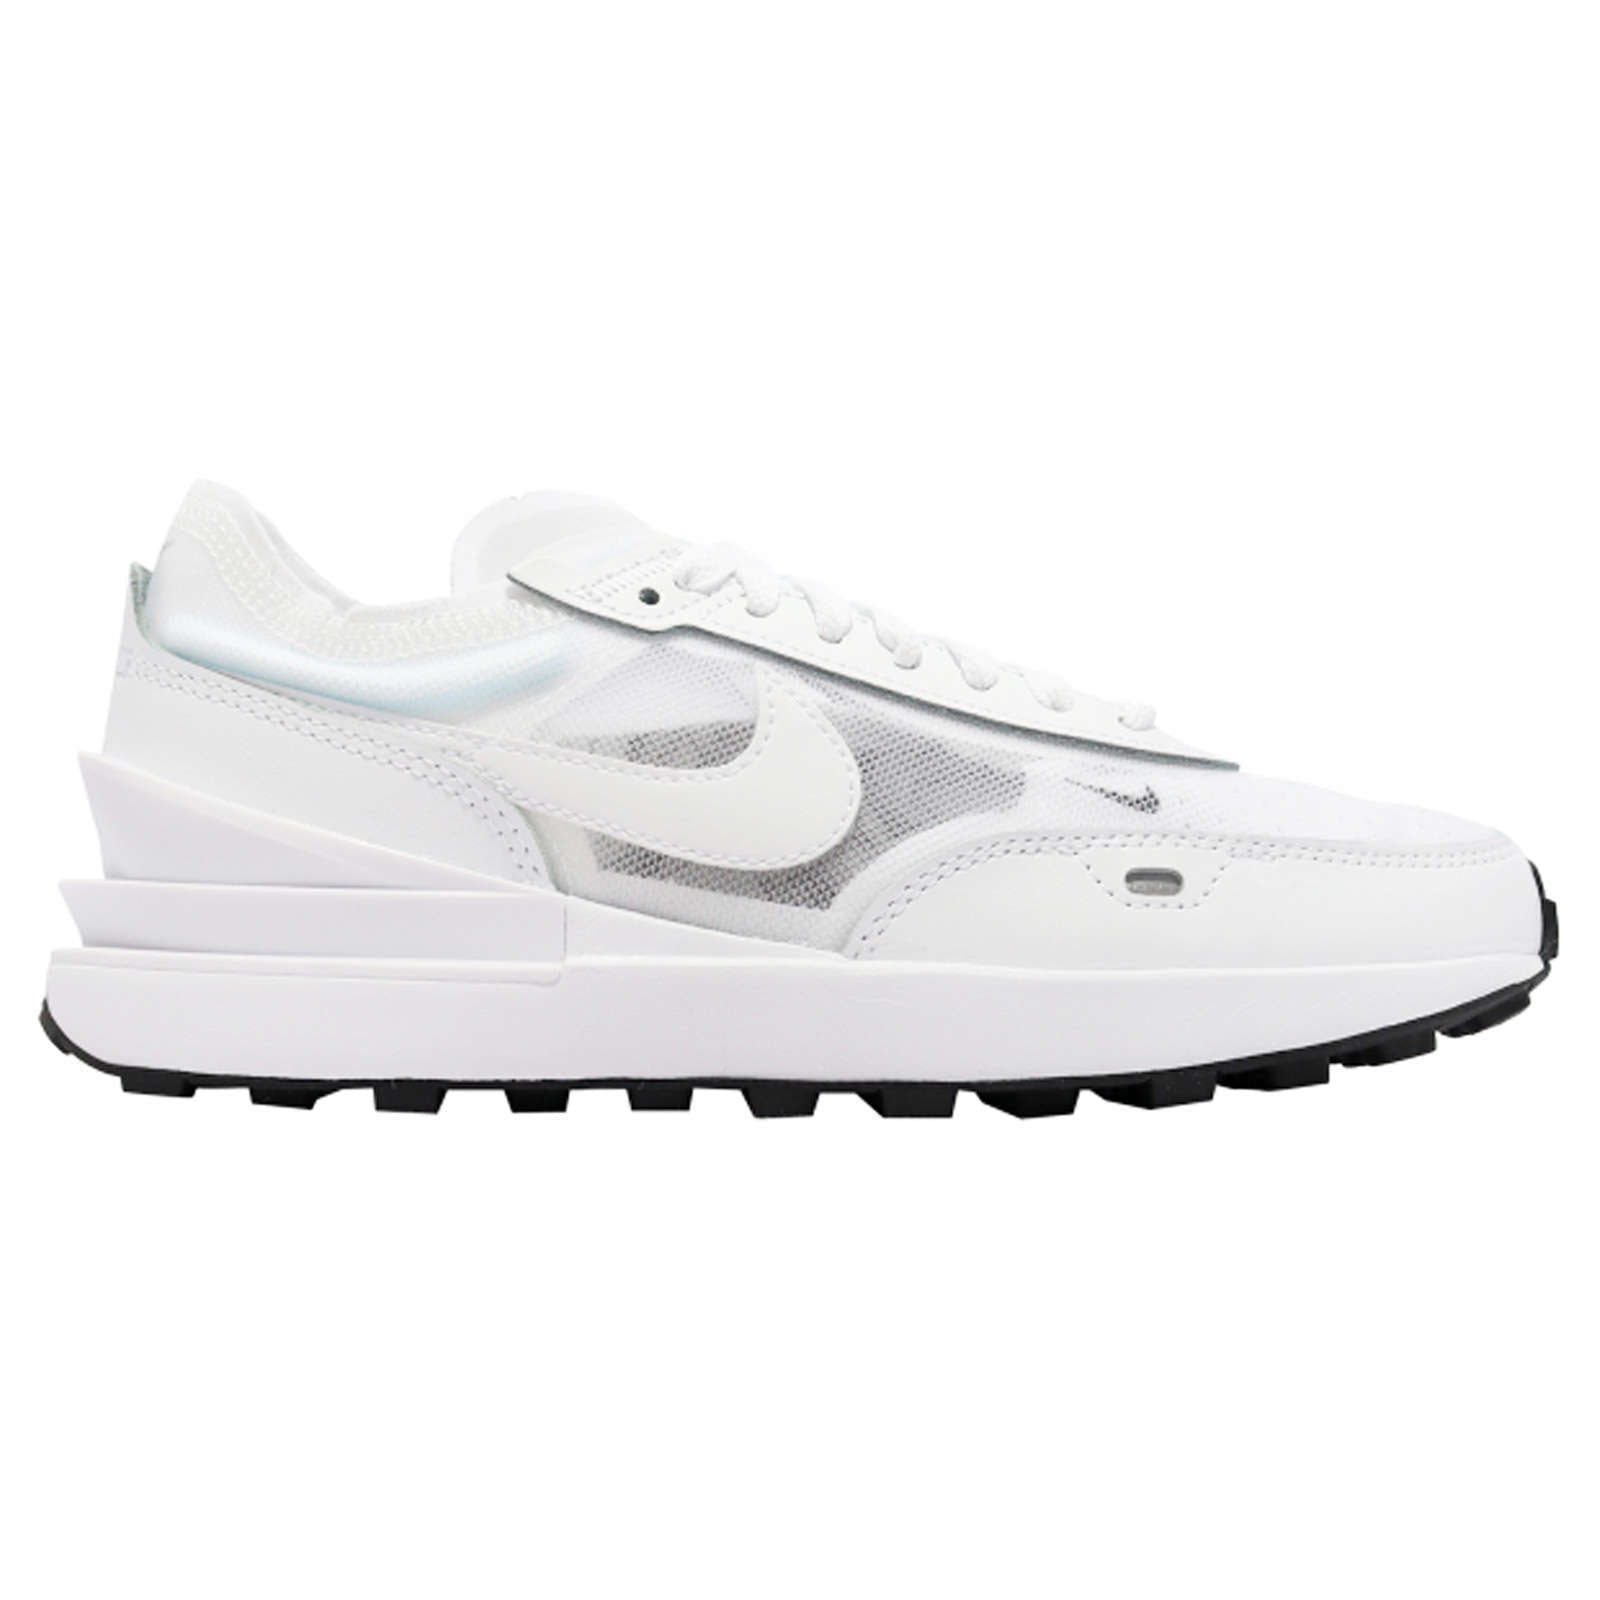 Nike Waffle One Leather Textile Women's Low-Top Trainers#color_white white black